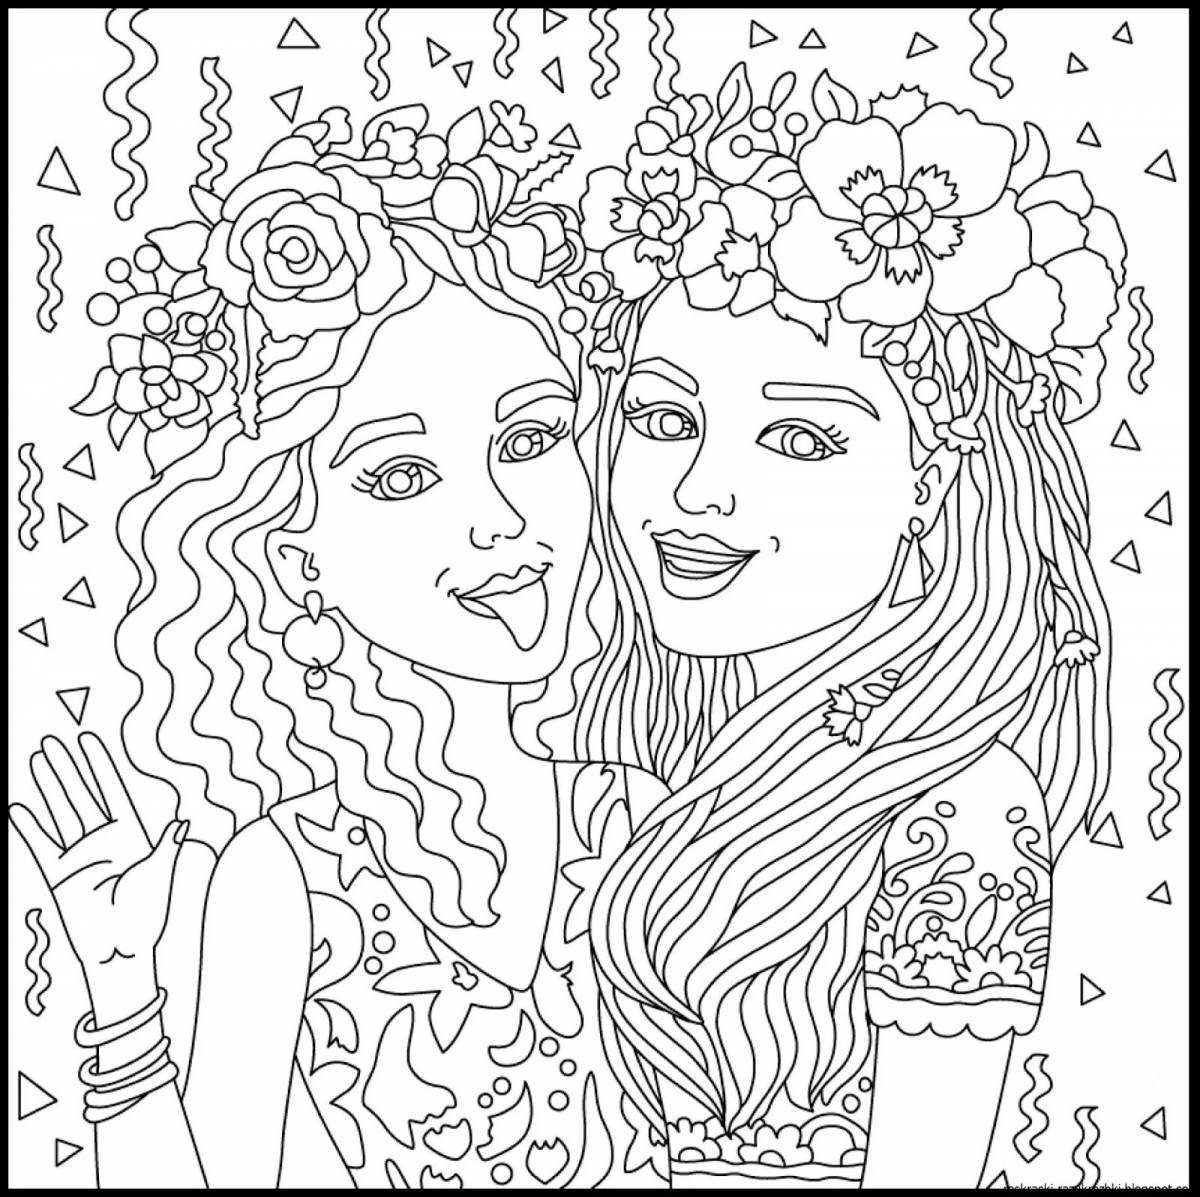 Colorful fun coloring book for girls 12 years old